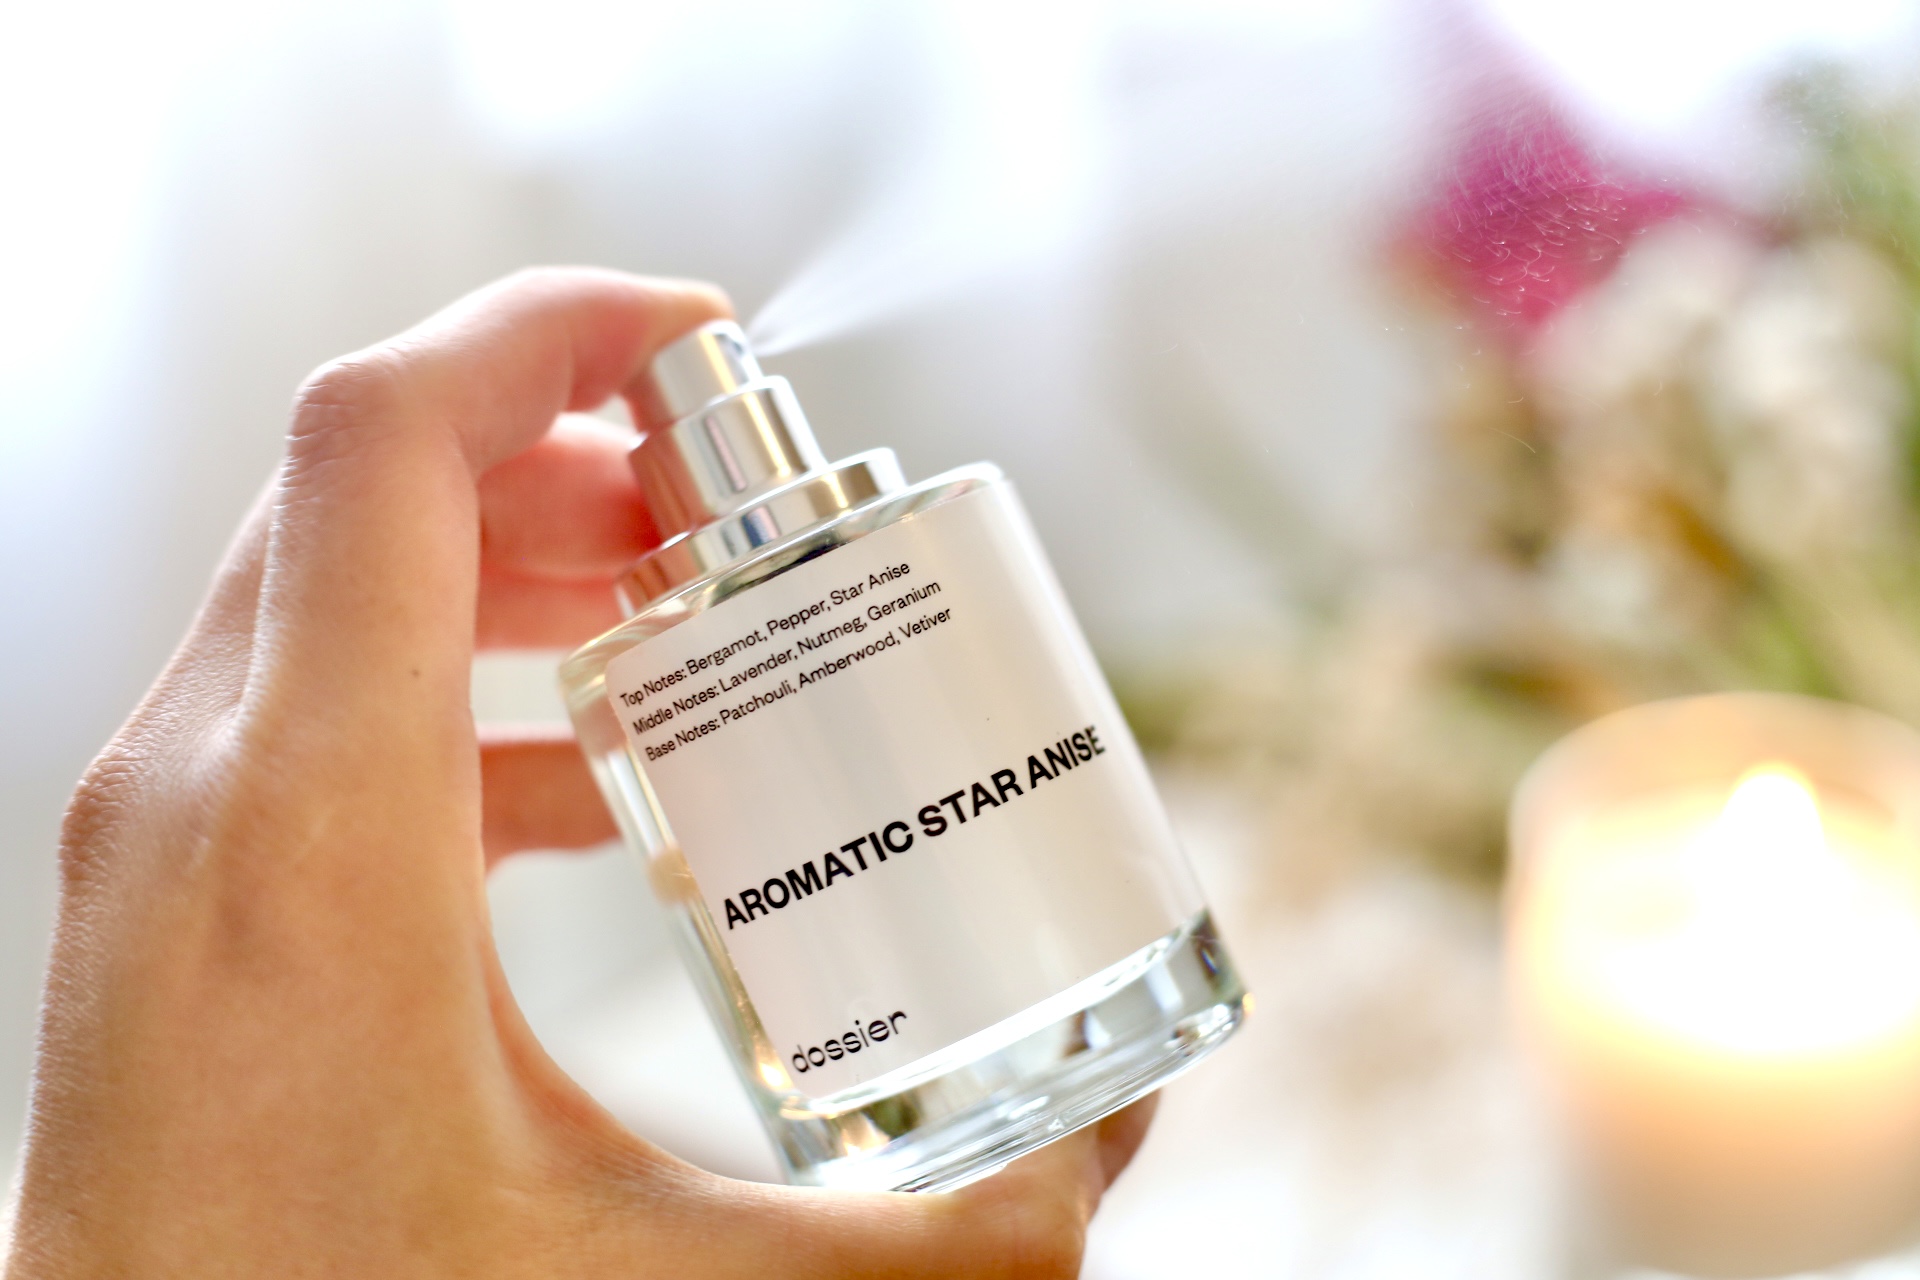 Dior Sauvage Perfume Impression: Aromatic Star Anise - Dossier